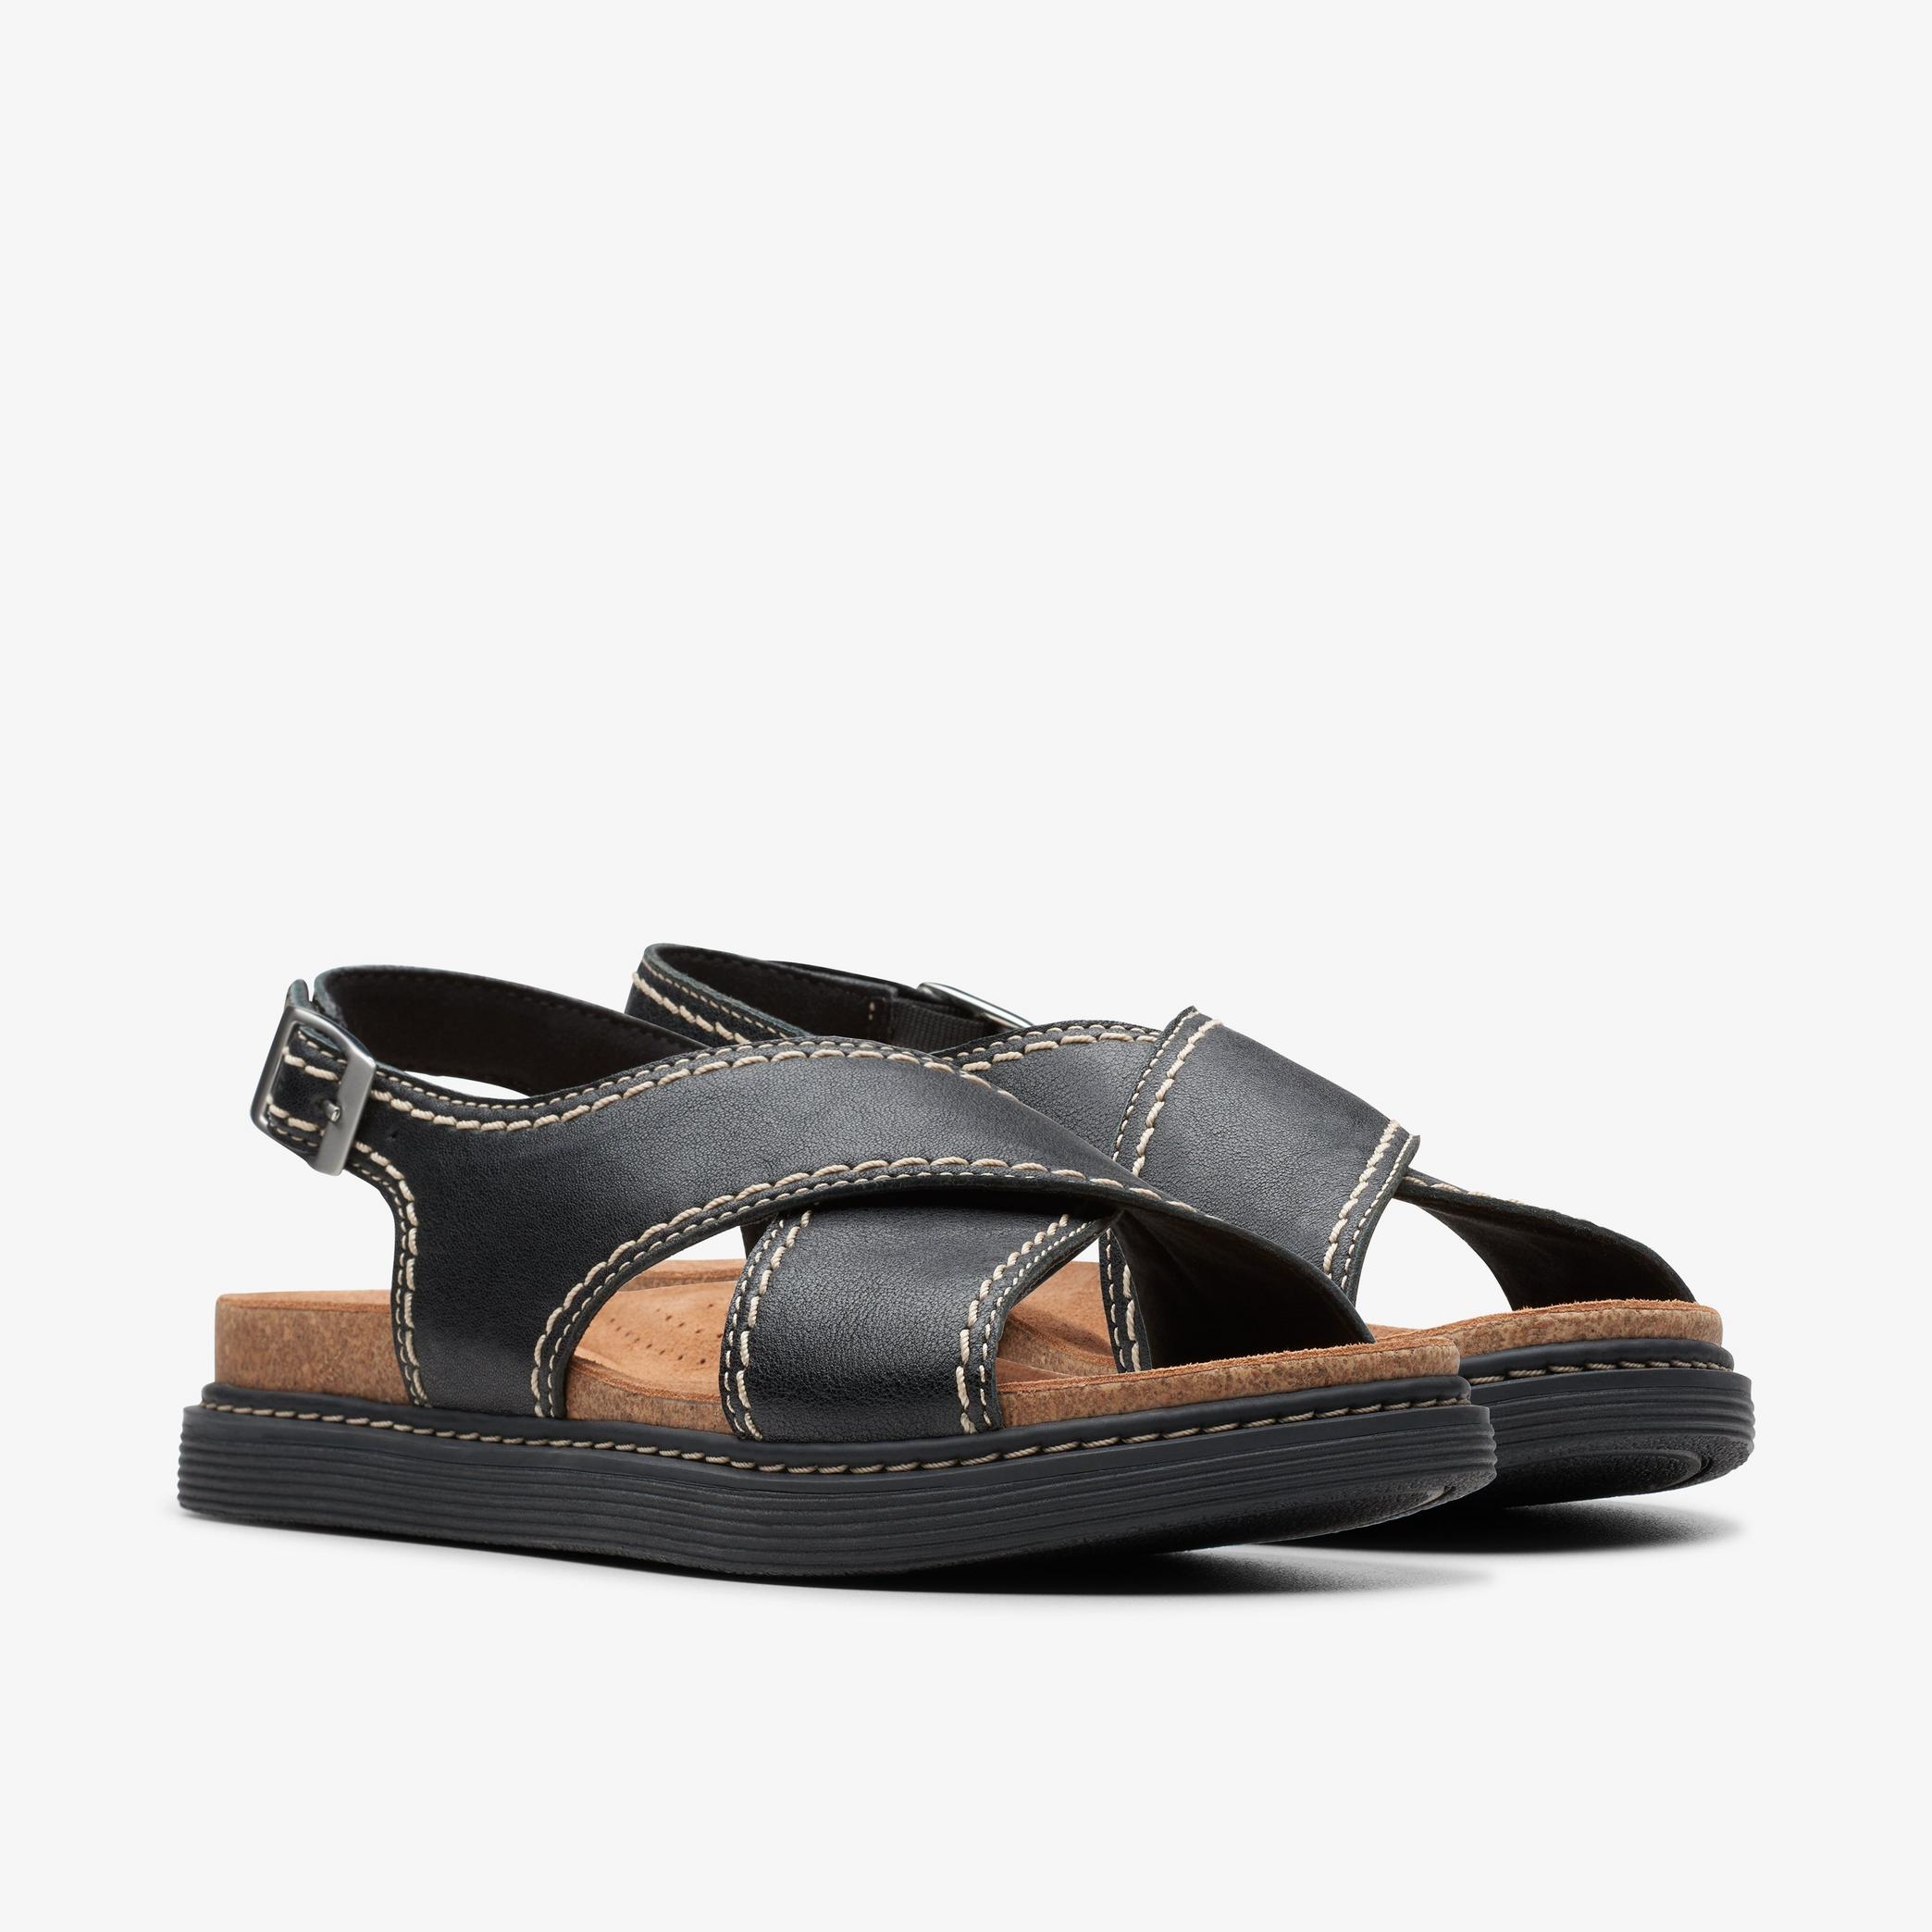 Arwell Sling Black Leather Flat Sandals, view 4 of 6